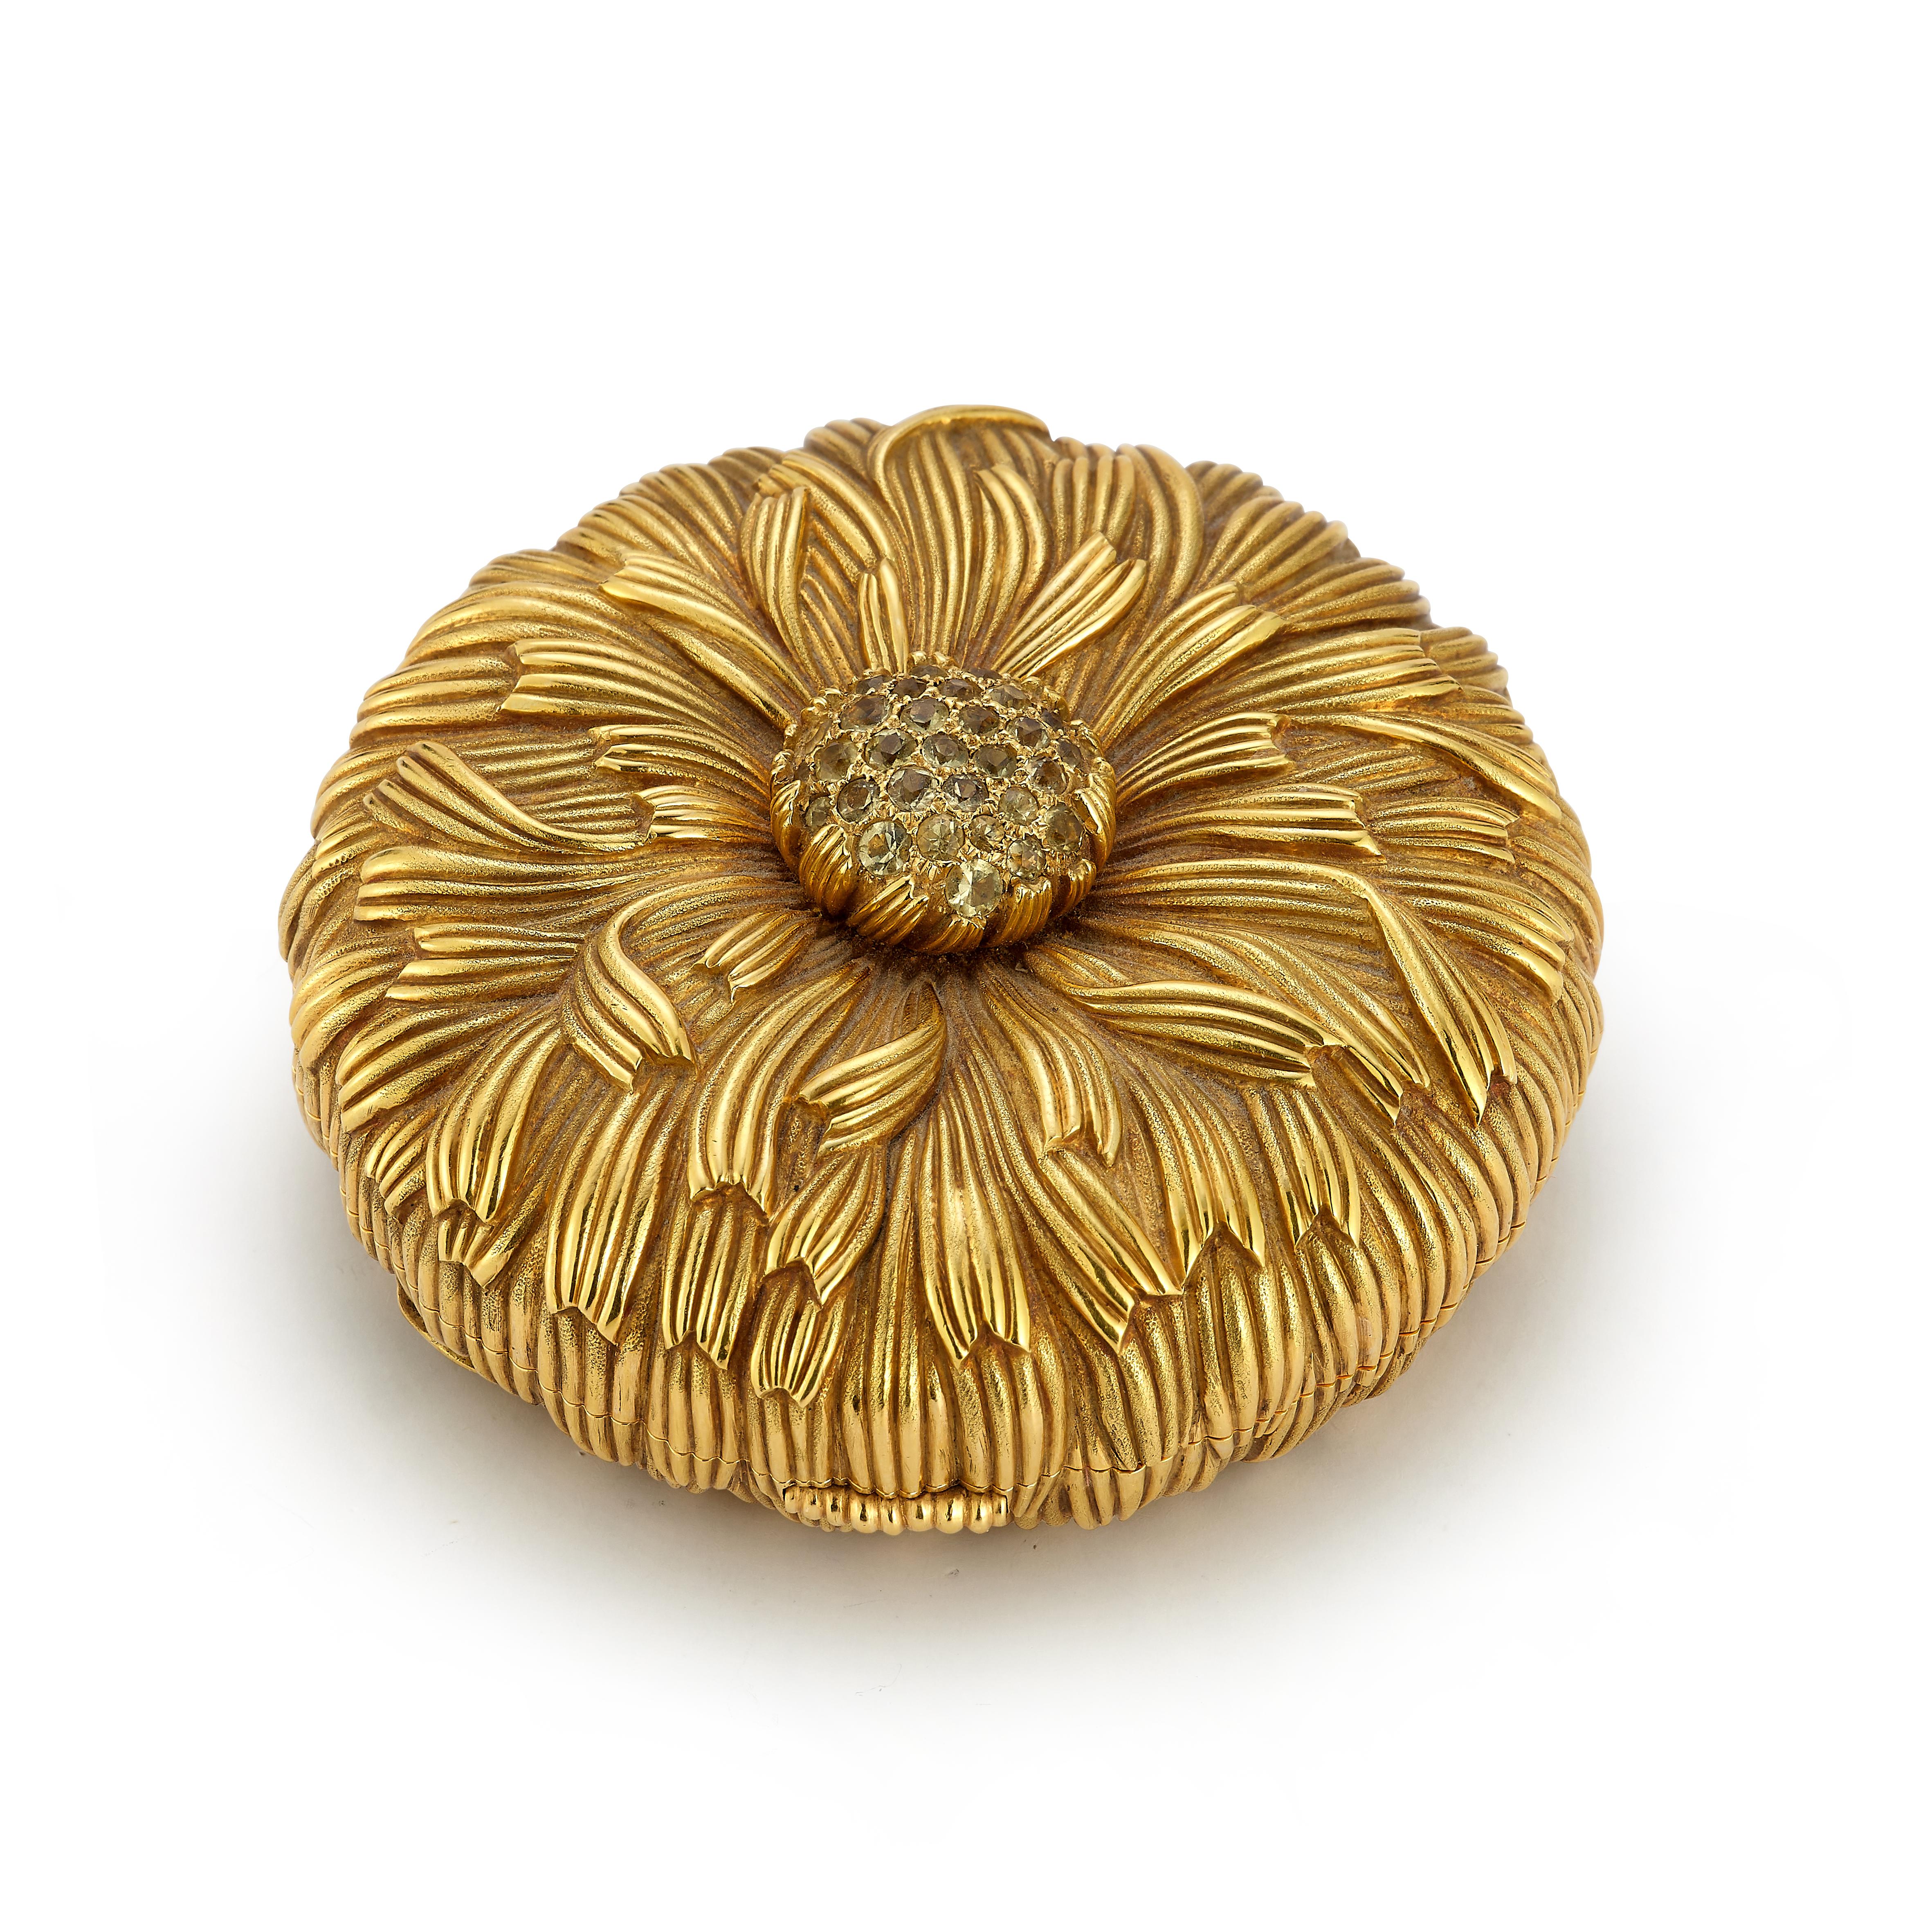 Schlumberger for Tiffany & Co. Yellow Sapphire & Gold Floral Compact Mirror

An 18 karat textured yellow gold compact mirror in the design of a flower set with a cluster of round yellow sapphires in the center. This compact contains a mirror, powder